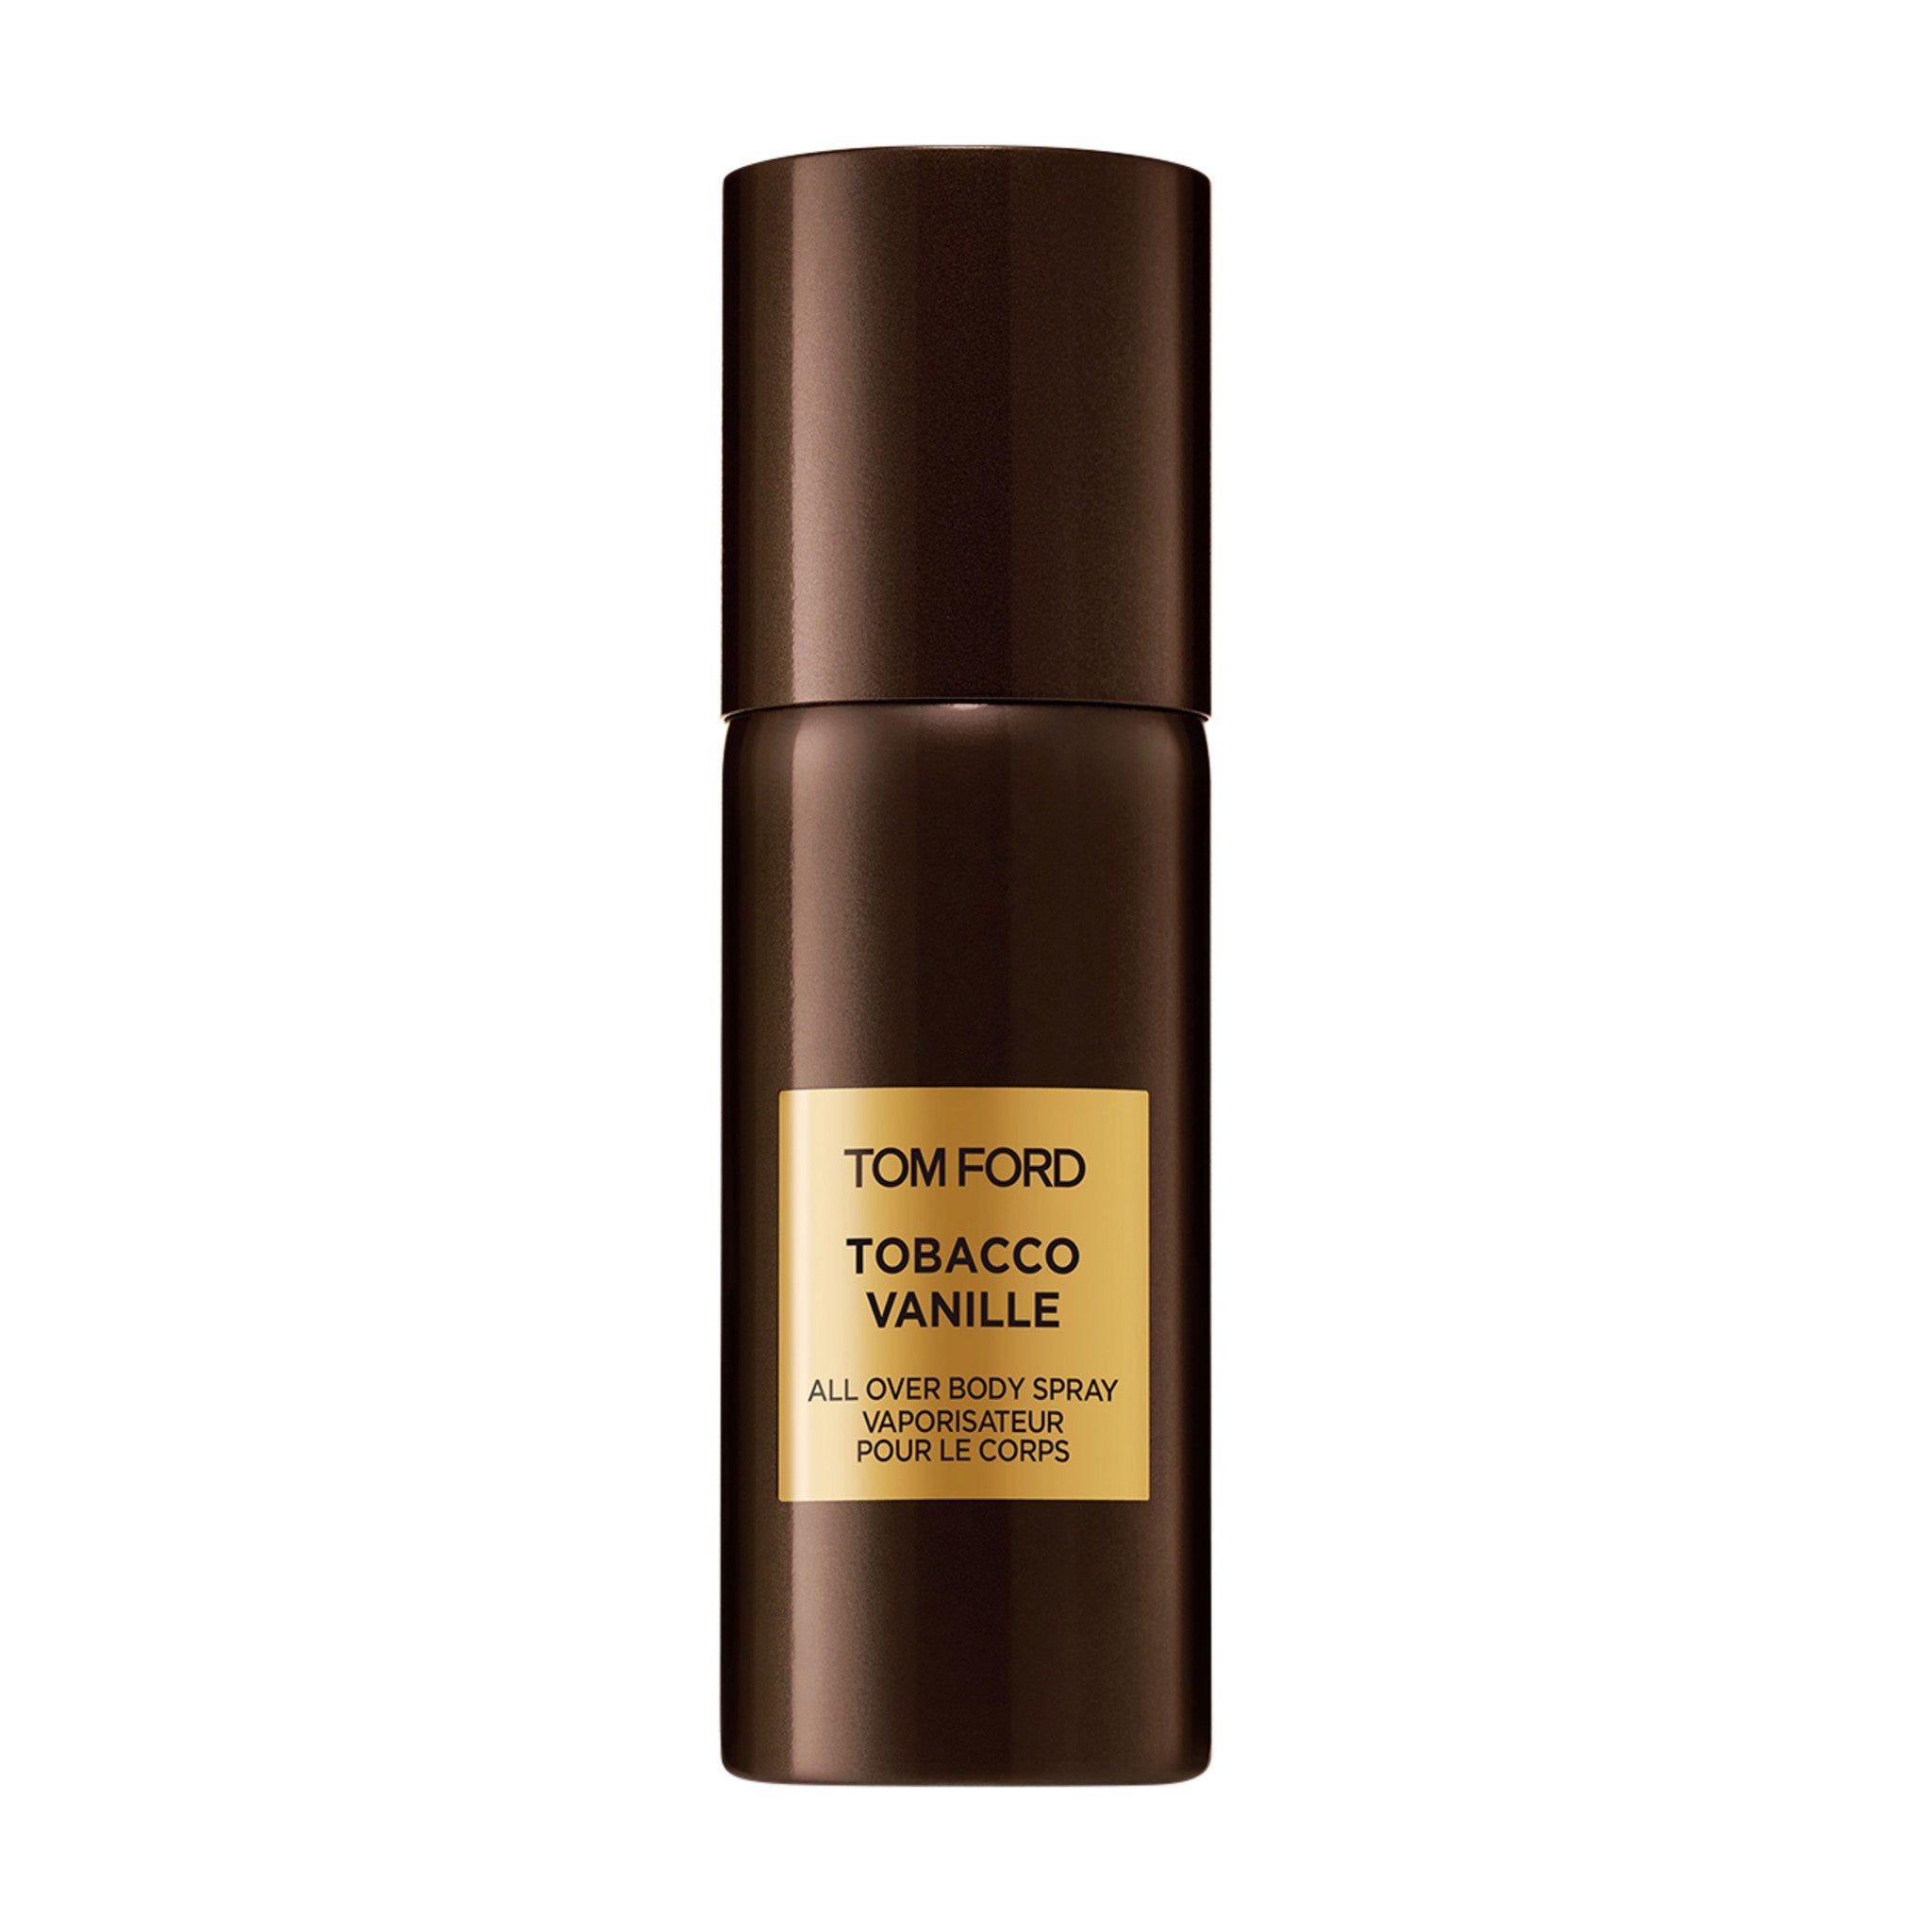 Tom Ford Tobacco Vanille All Over Body Spray main image.